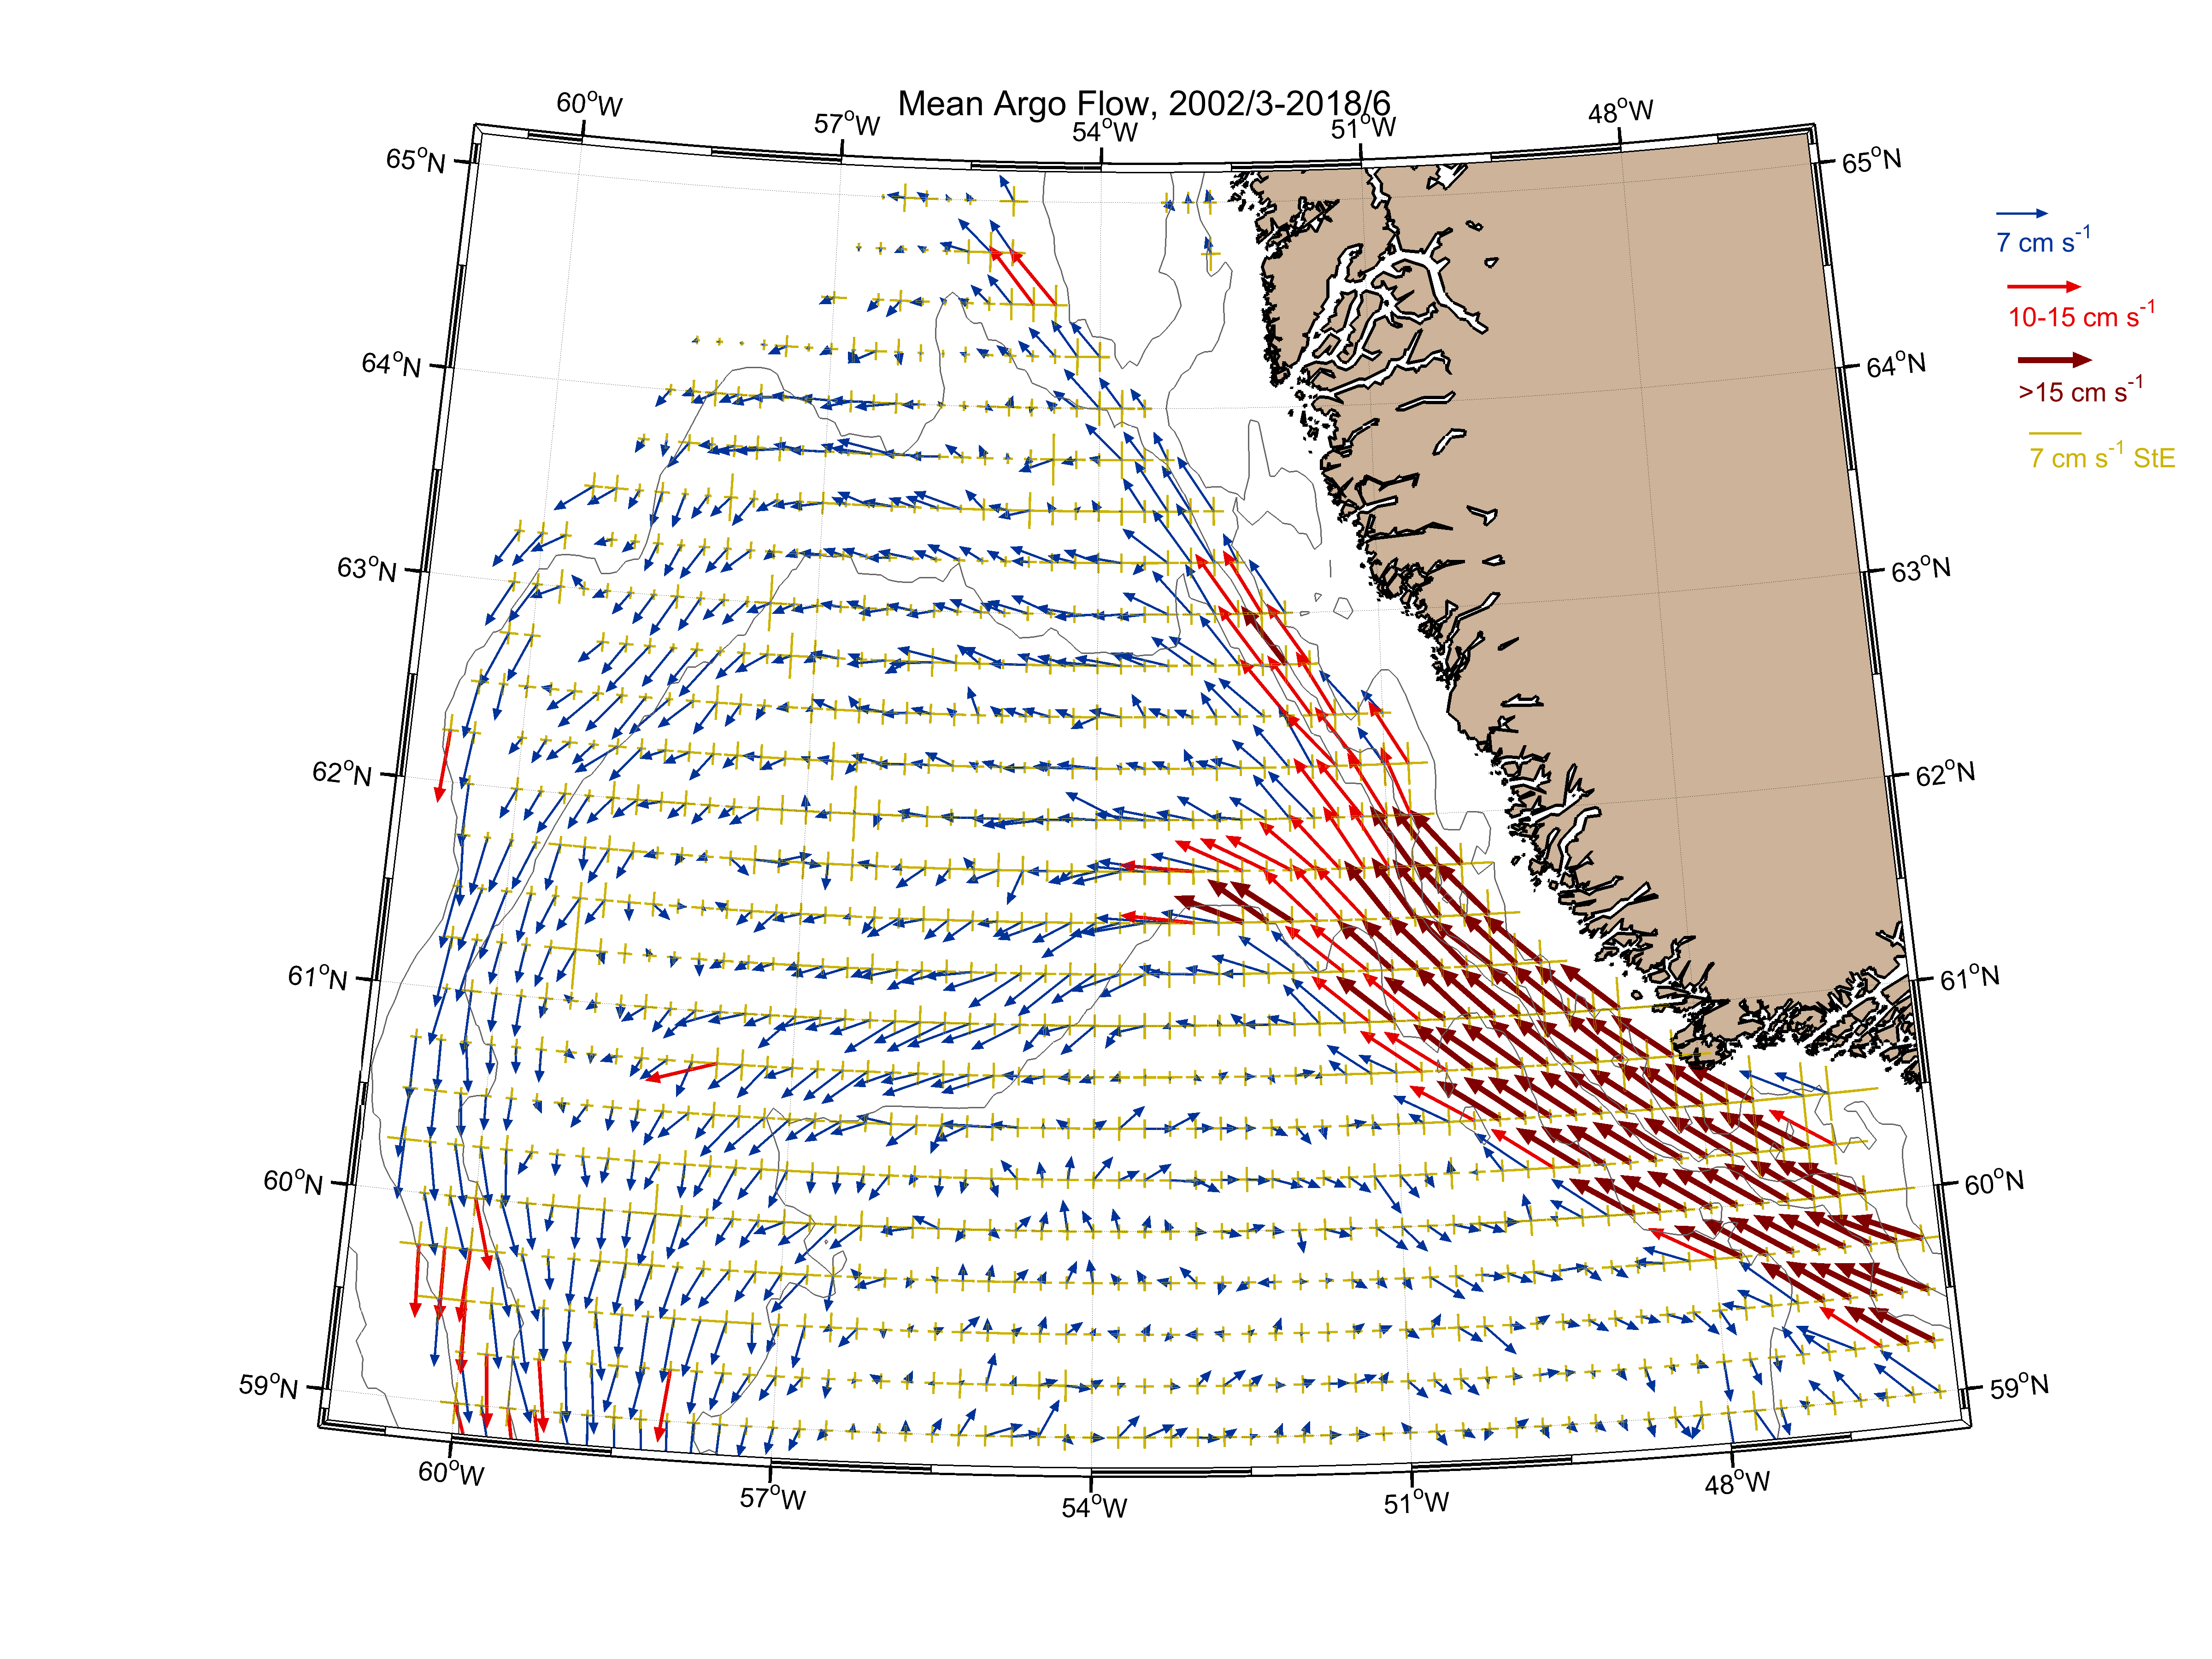 Currents in the North Atlantic between Greenland and Canada. Analysis and figure contributed by Igor Yashayaev.